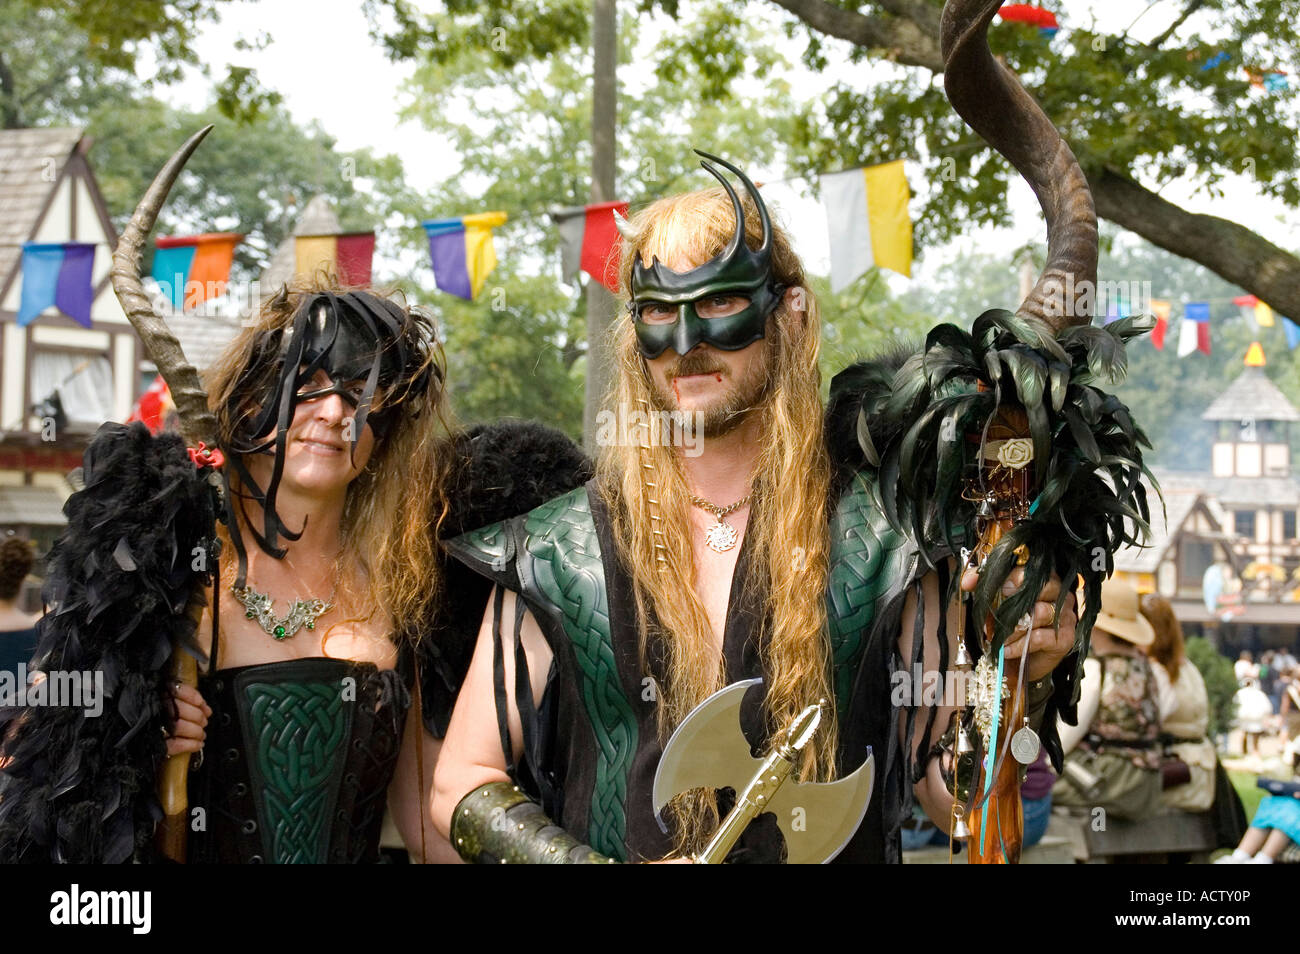 A COUPLE DRESSED IN OLD EUROPEAN CLOTHES IS POSING WITH THEIR ARMS AT RENAISSANCE FAIR IN BRISTOL, WISCONSIN Stock Photo